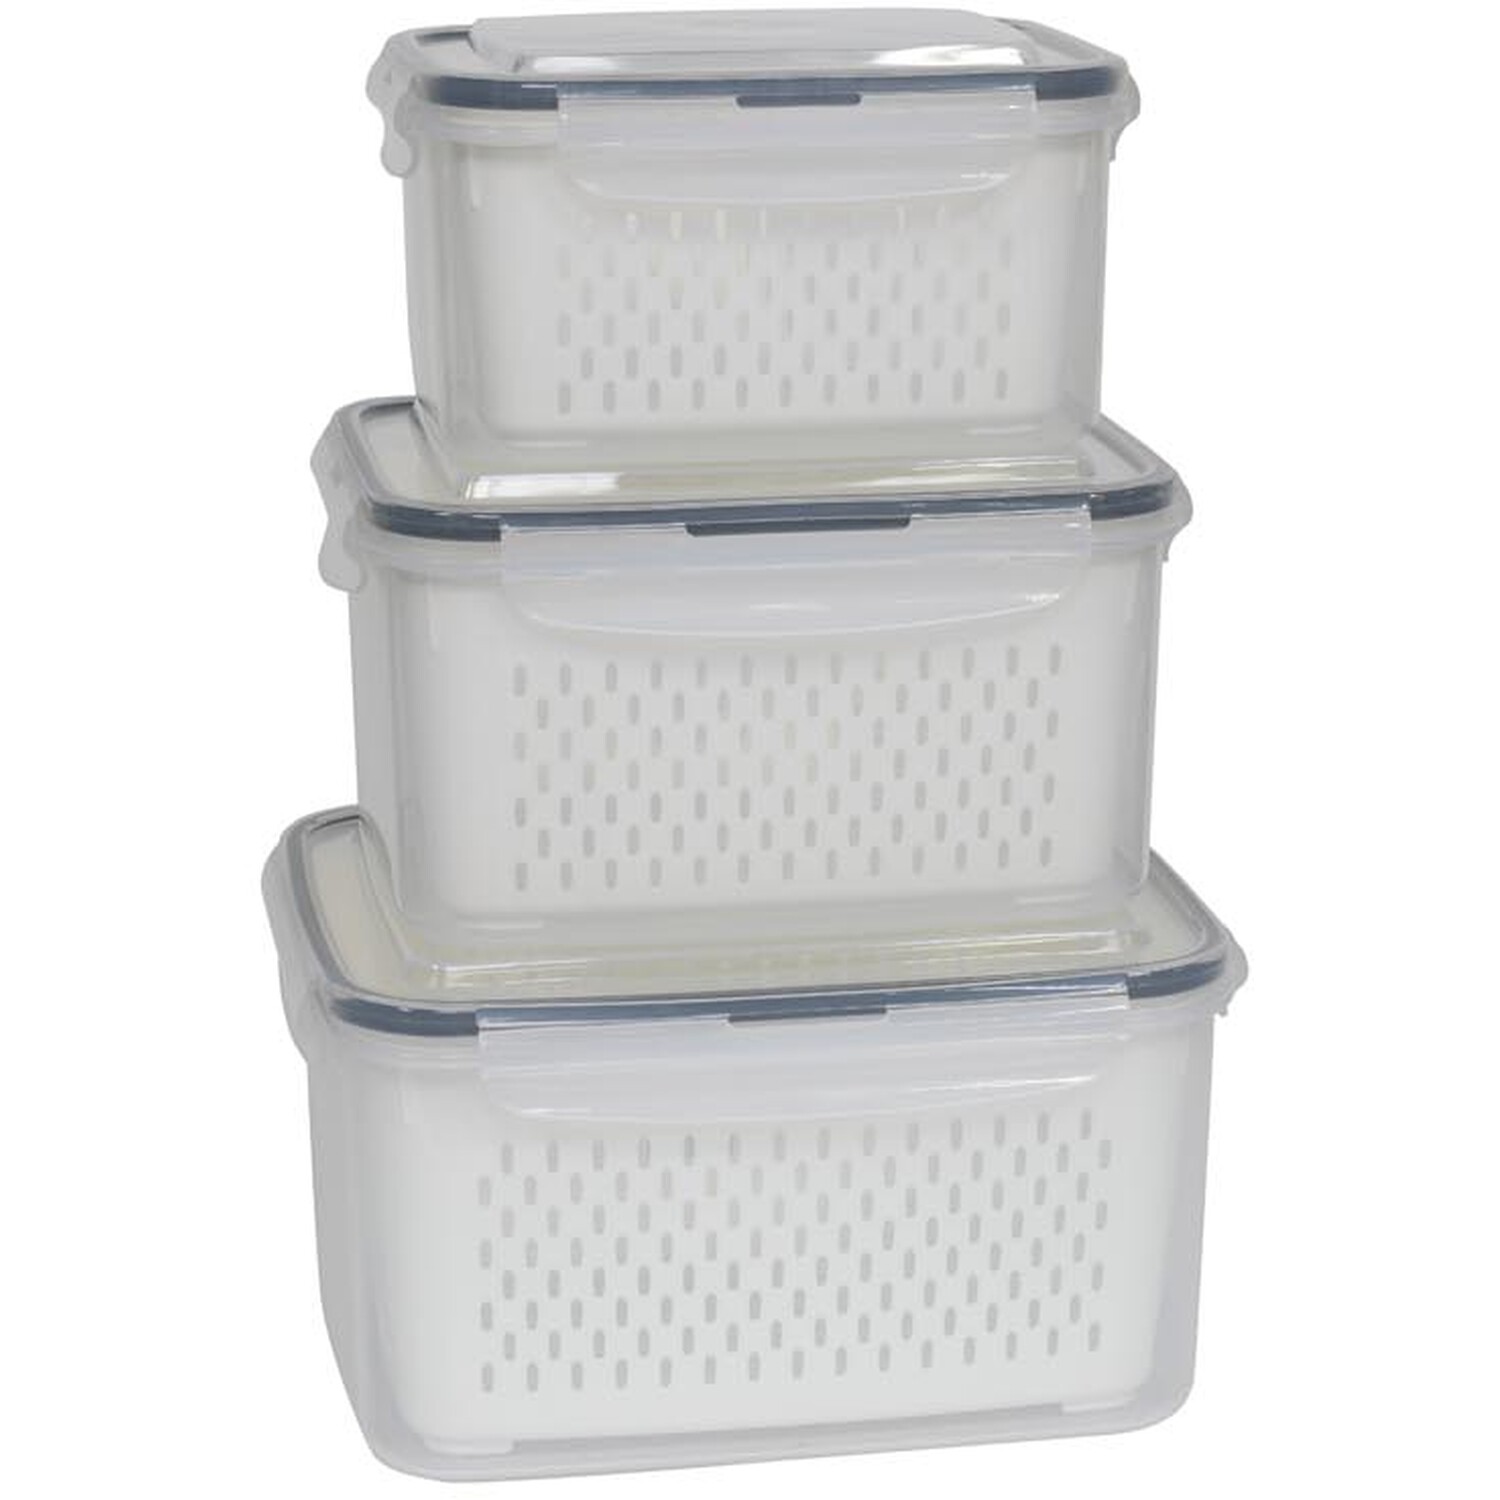 Pack of 3 Draining Food Storage Boxes - White Image 1